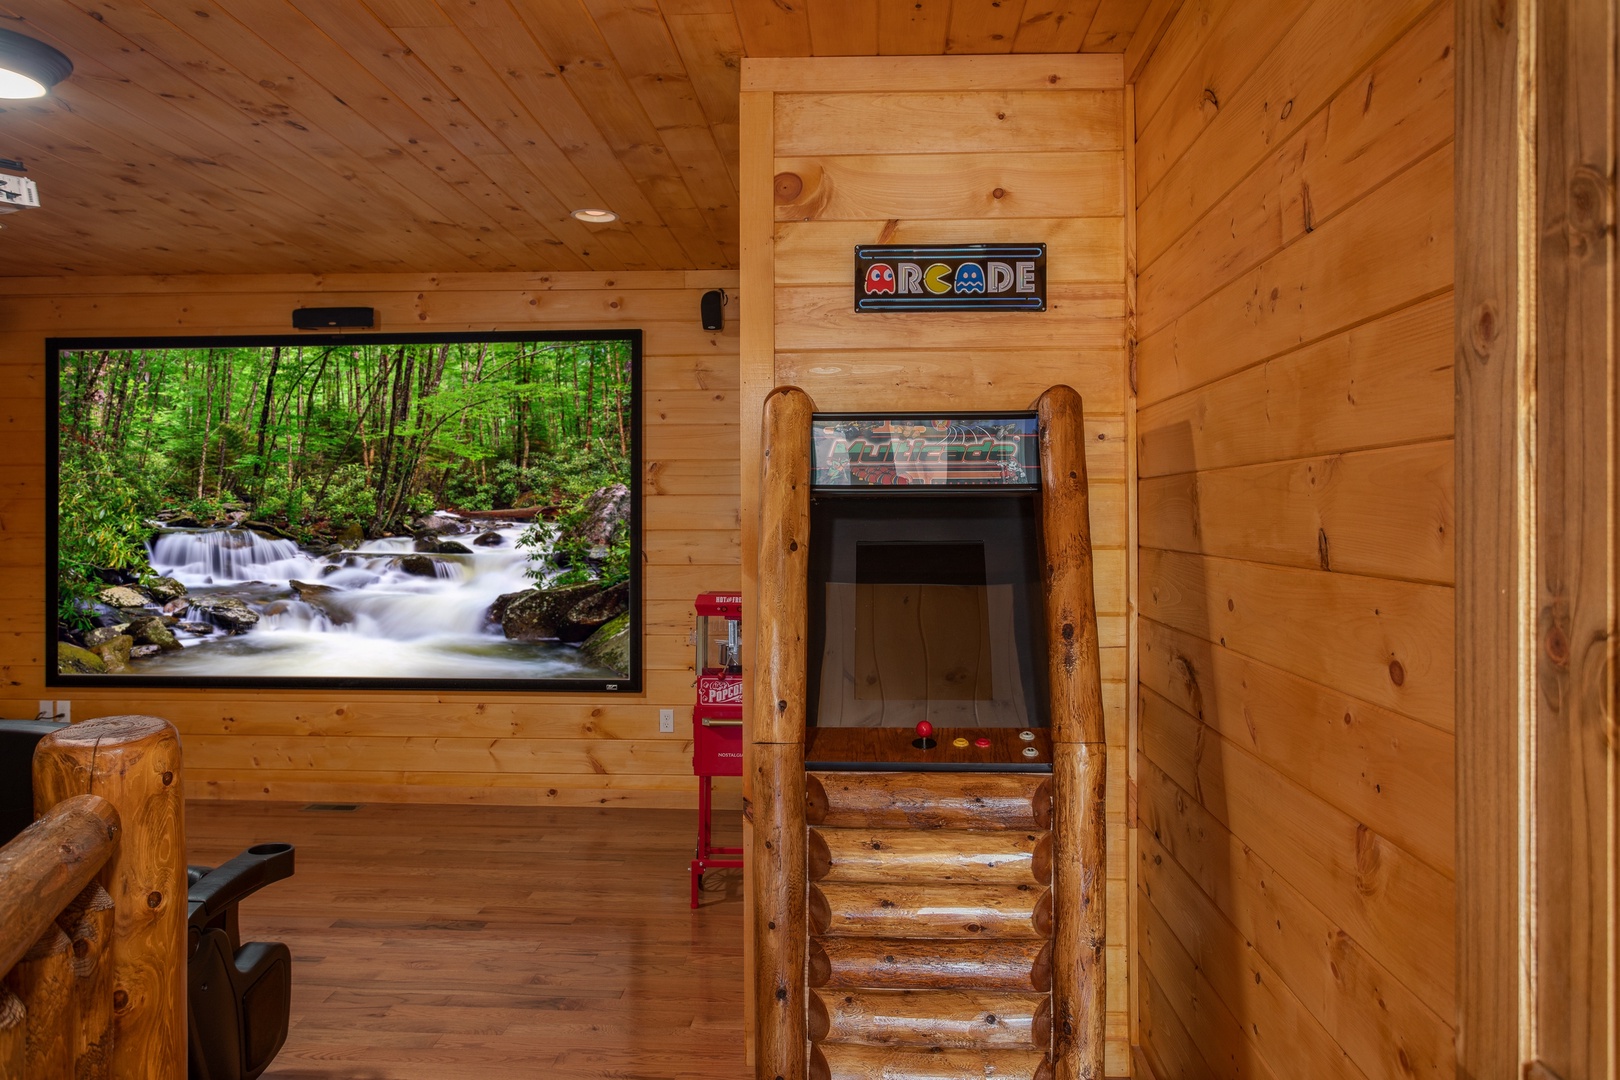 Arcade game in the theater room at Four Seasons Palace, a 5-bedroom cabin rental located in Pigeon Forge